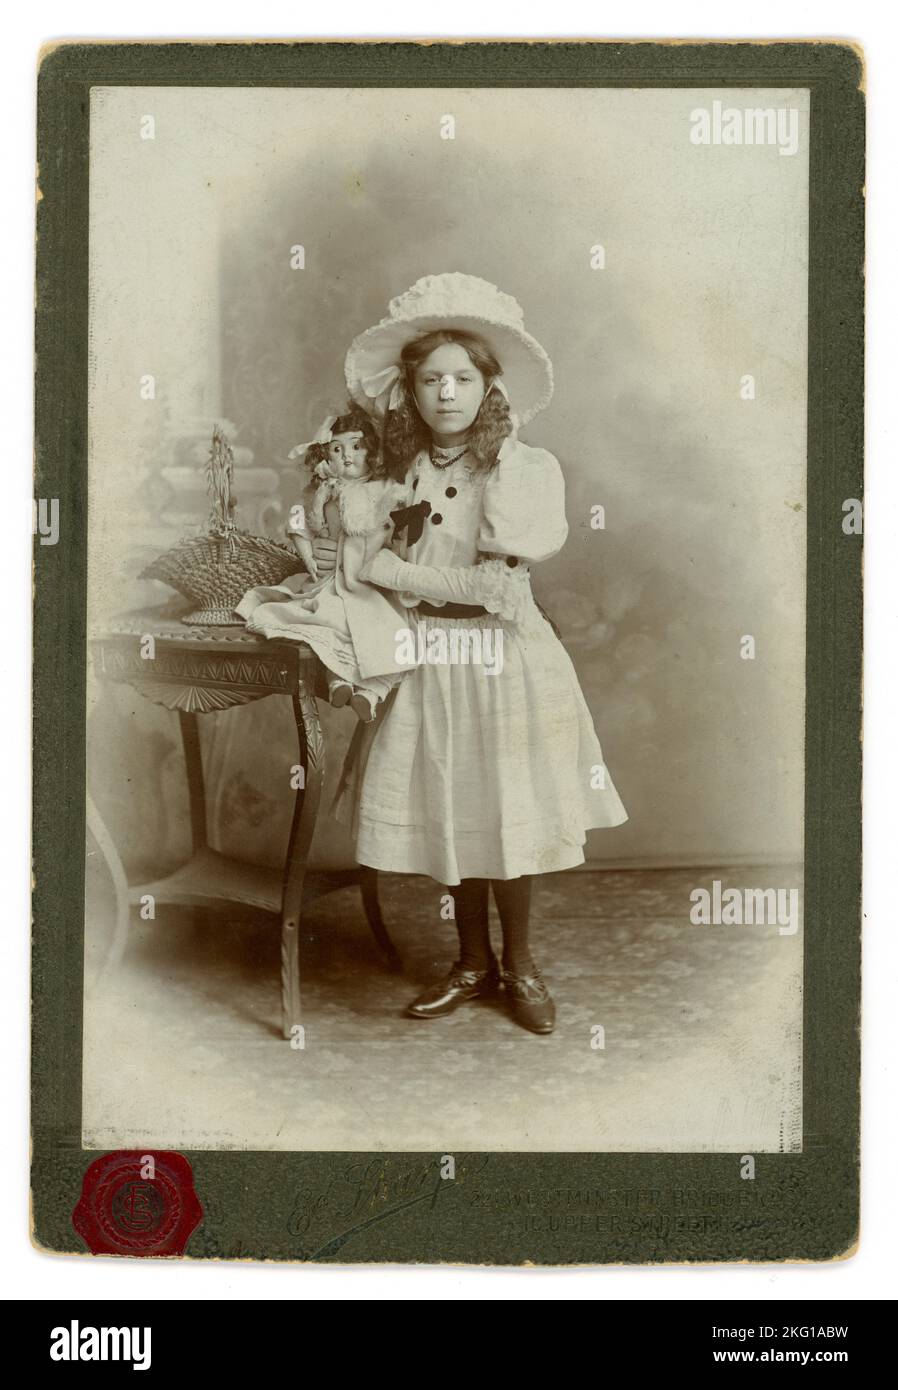 Edwardian era cabinet card studio portrait of spoilt-looking privileged wealthy middle or upper class girl holding a doll which has a china face, perhaps a new birthday present or a treasured possession or could be a studio prop. On reverse is written Clara R. J. Whant, aged 11 1909. The girl wears expensive clothing - a large wide brimmed hat as was the fashion in this period, and white frock with puffed sleeves. She has crimped long hair tied in bows.  From the studio of Edward Sharp at Islington and Westminster Bridge London . U.K. Dated 1909. Stock Photo